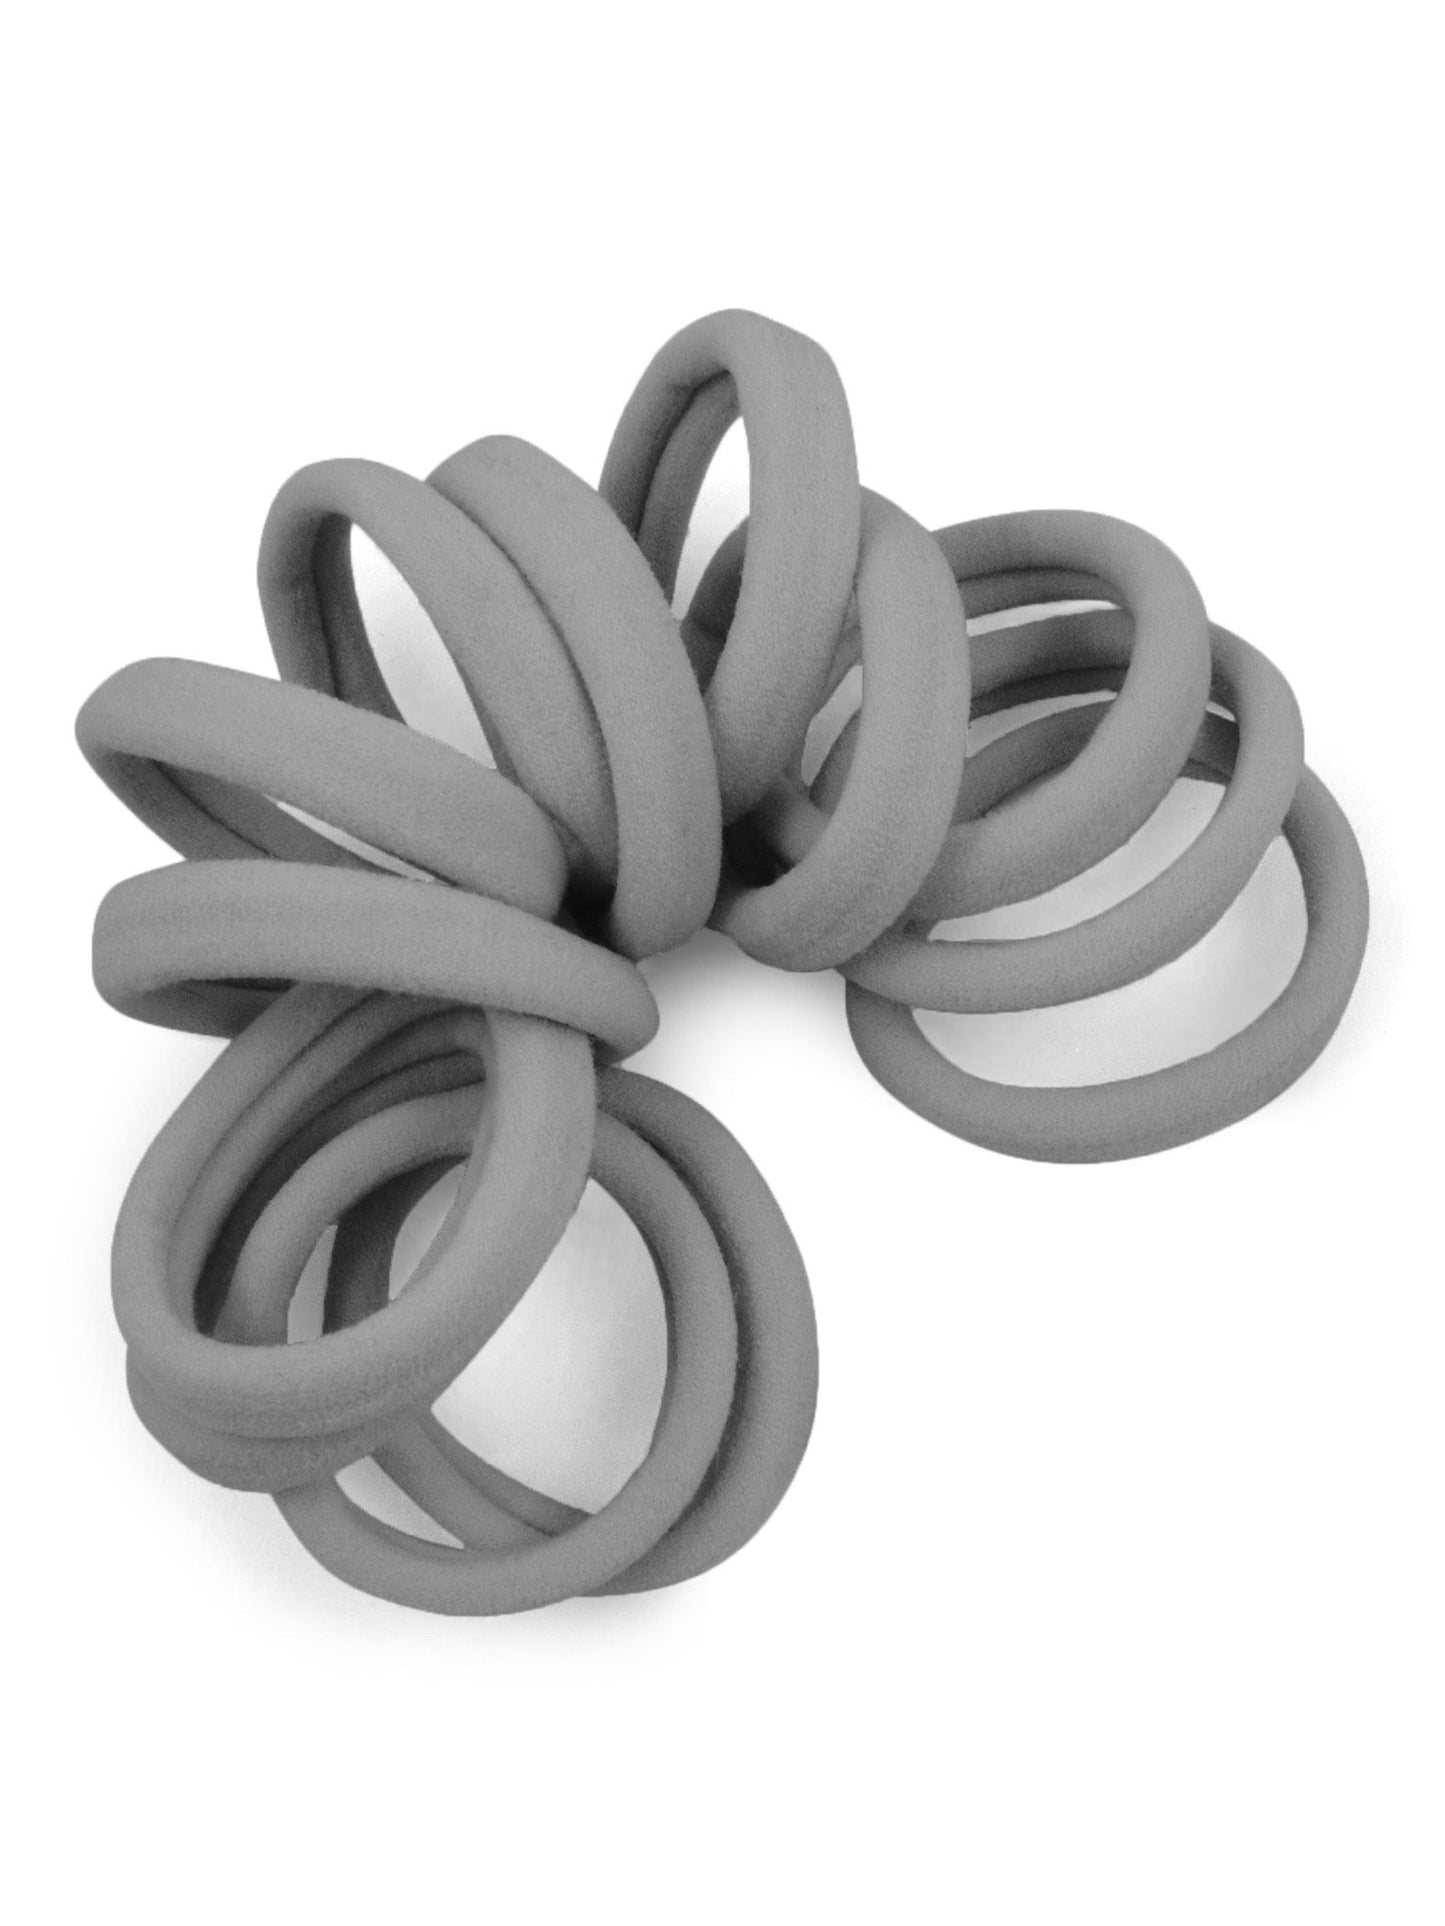 Seamless Hair Ties - Gentle Hold - 12 Count - Gray